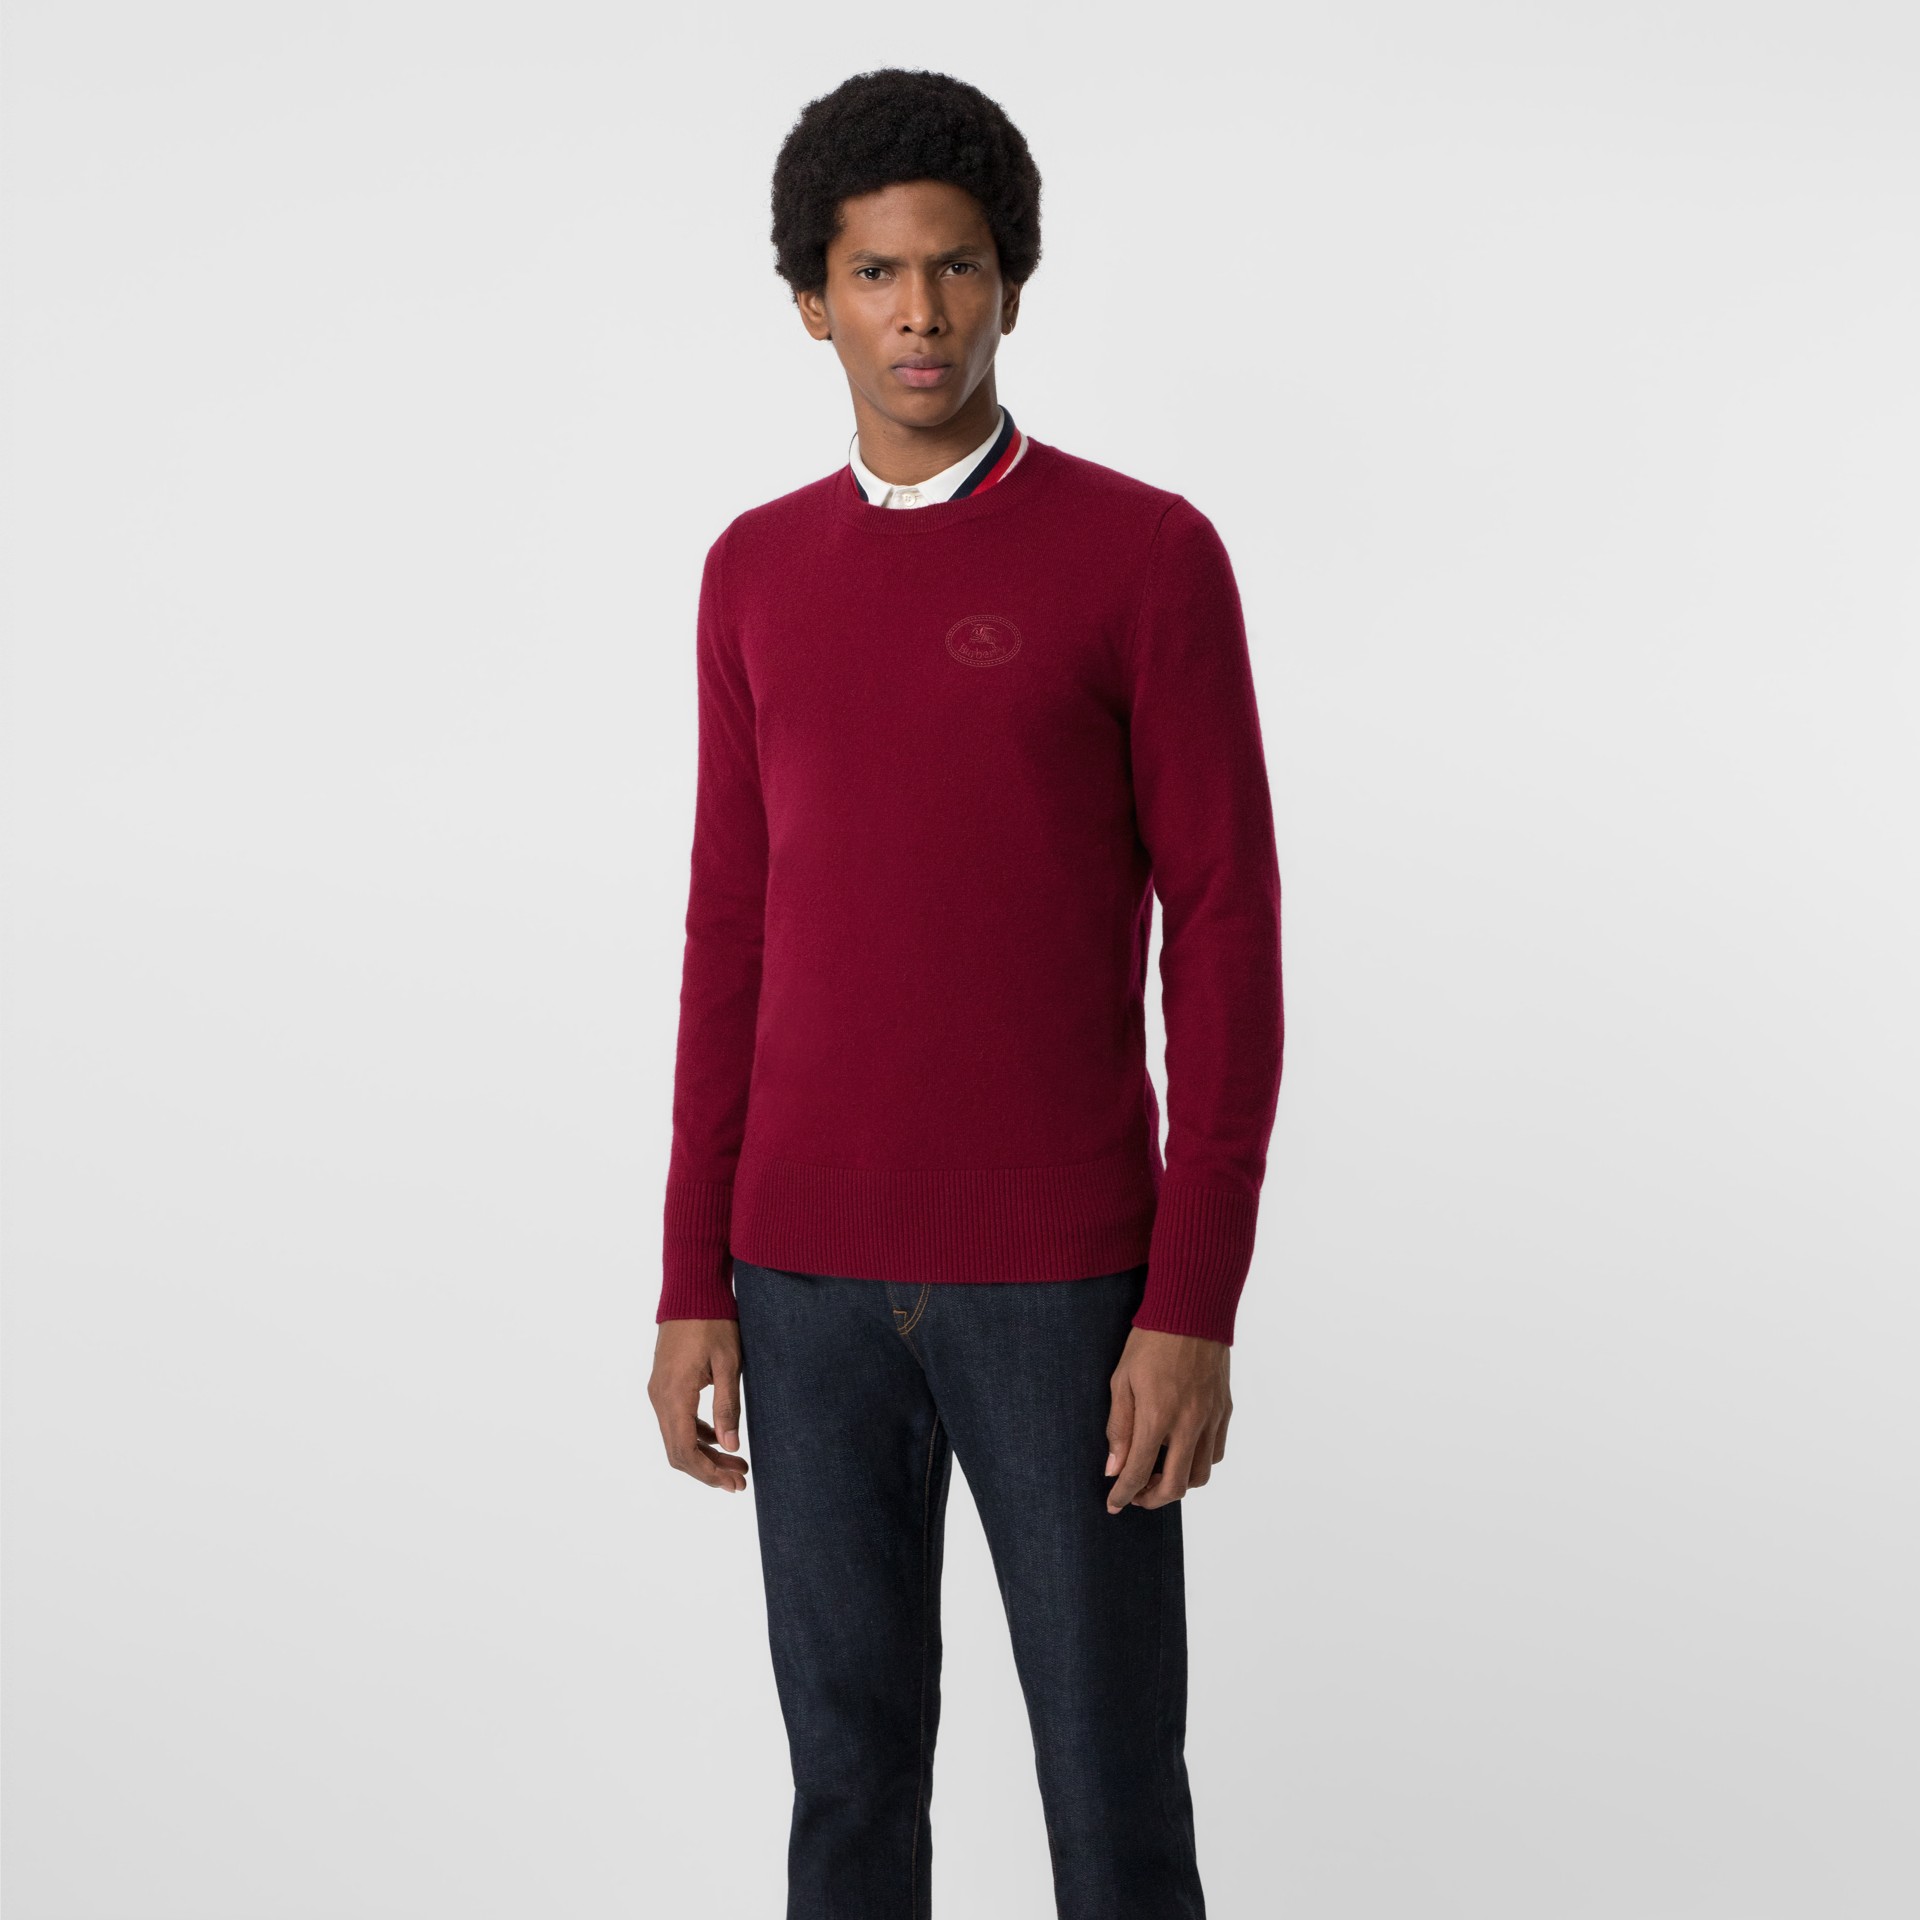 Embroidered Logo Cashmere Sweater in Claret - Men | Burberry United States